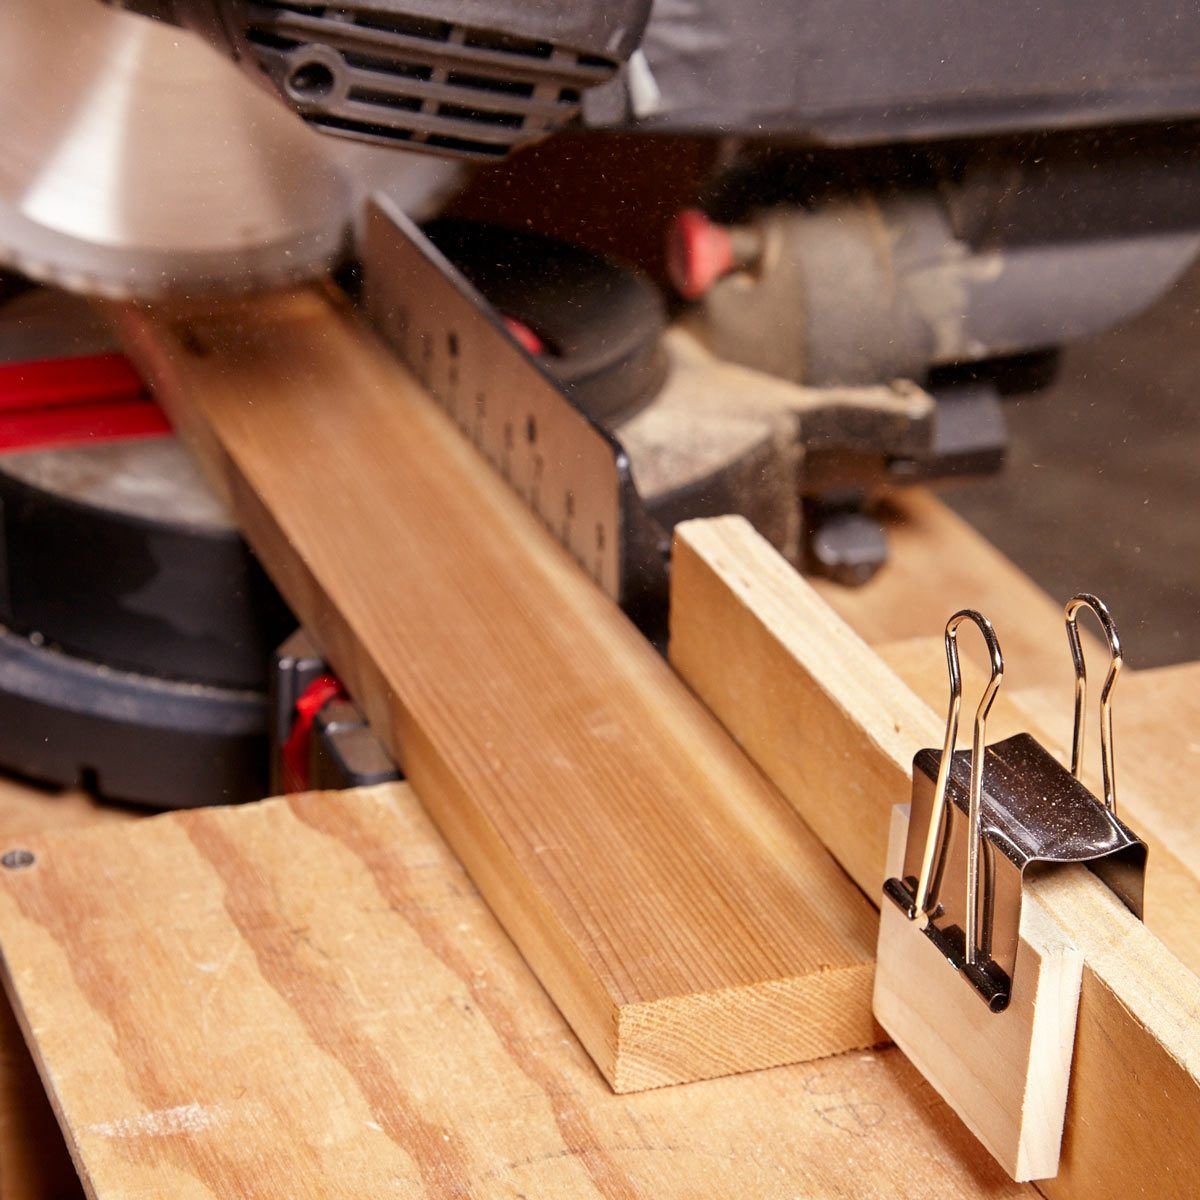 What Are The Most Important Tools For Woodworking